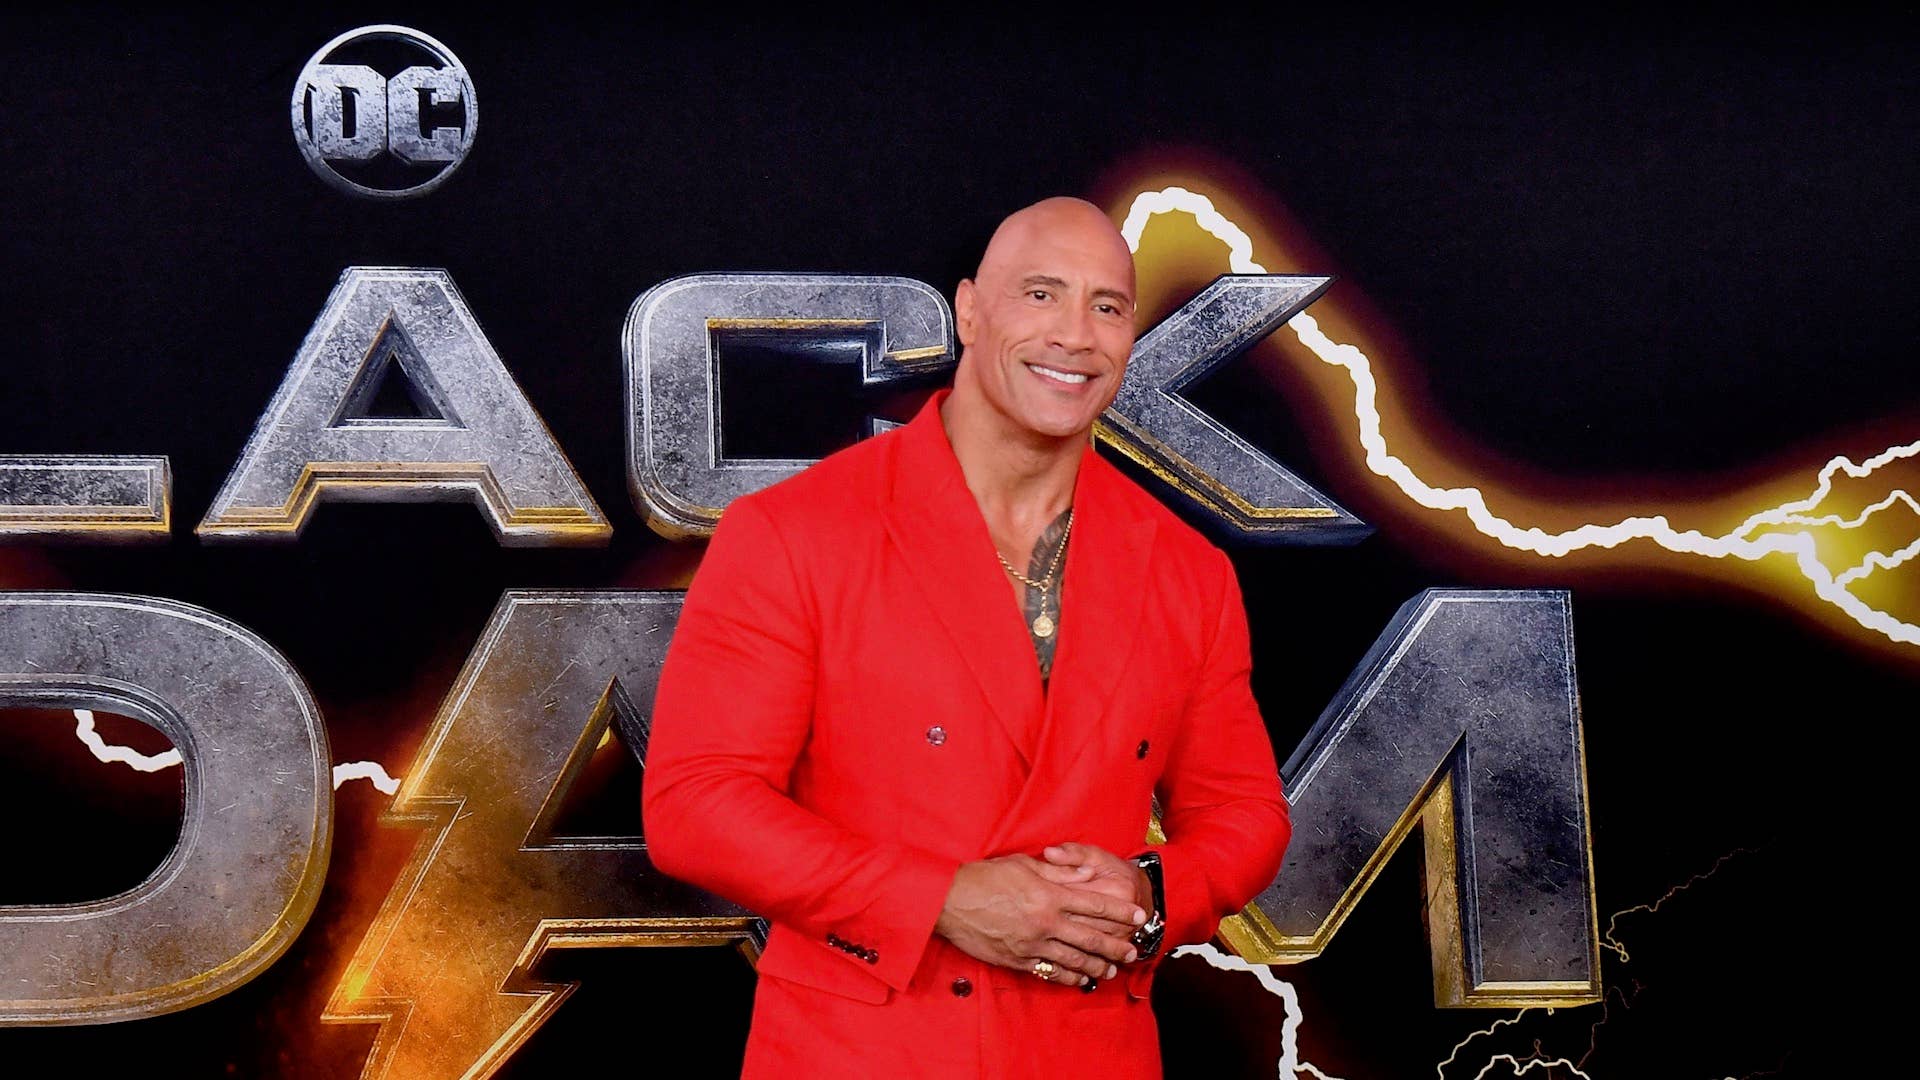 Dwayne Johnson arrives for the premiere of "Black Adam" at Time Square in New York City